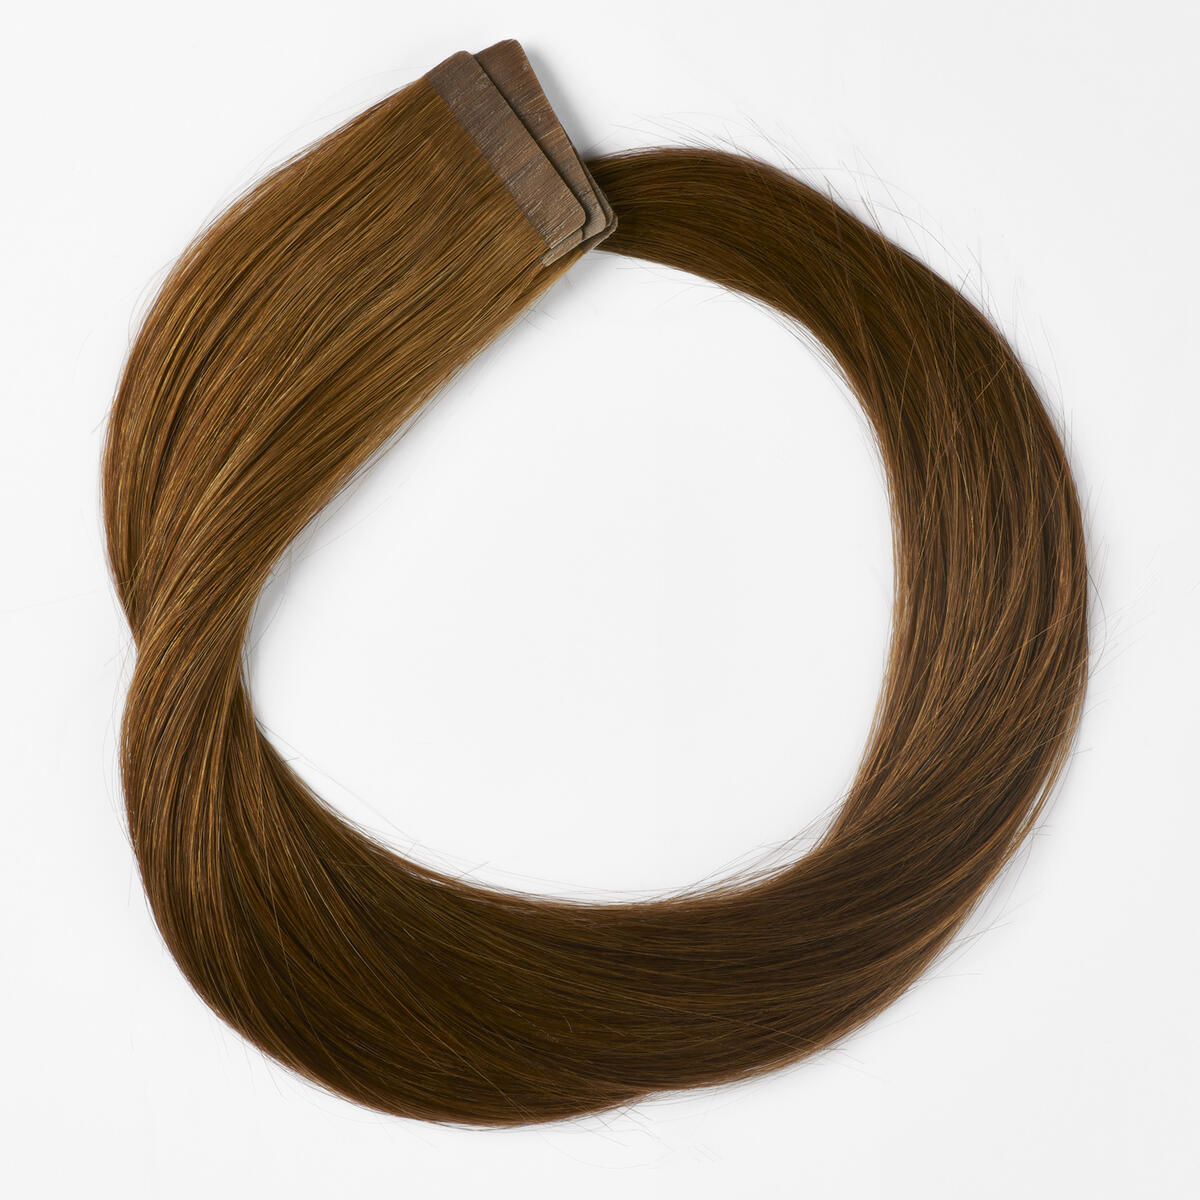 Basic Tape Extensions Classic 4 5.4 Copper Brown 50 cm